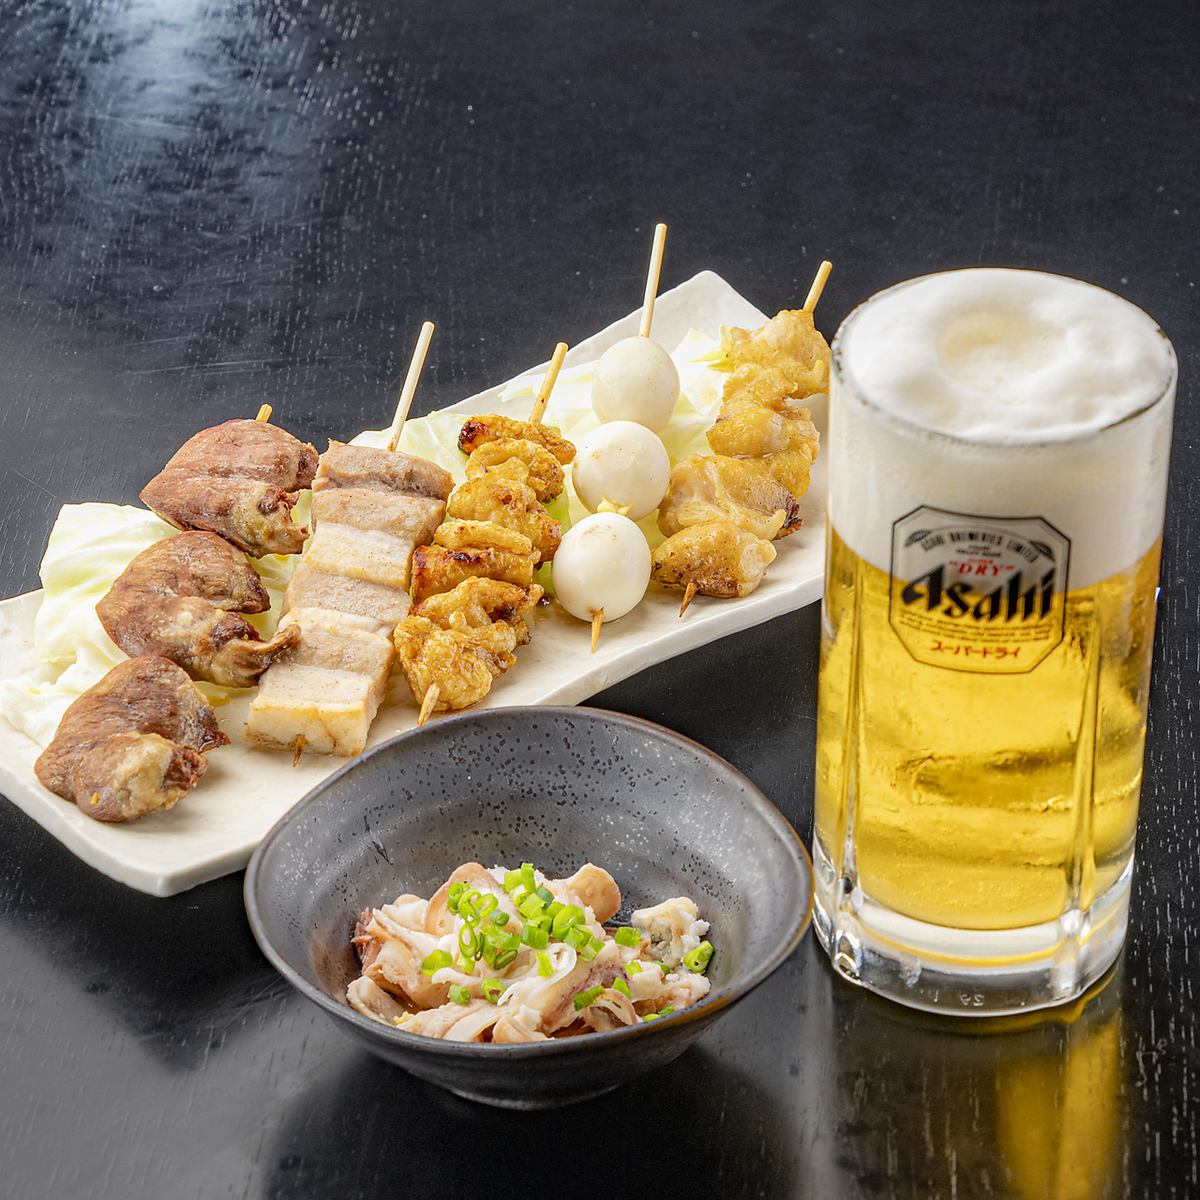 The yakitori that is carefully prepared one by one is exquisite! We have a wide variety of varieties available.